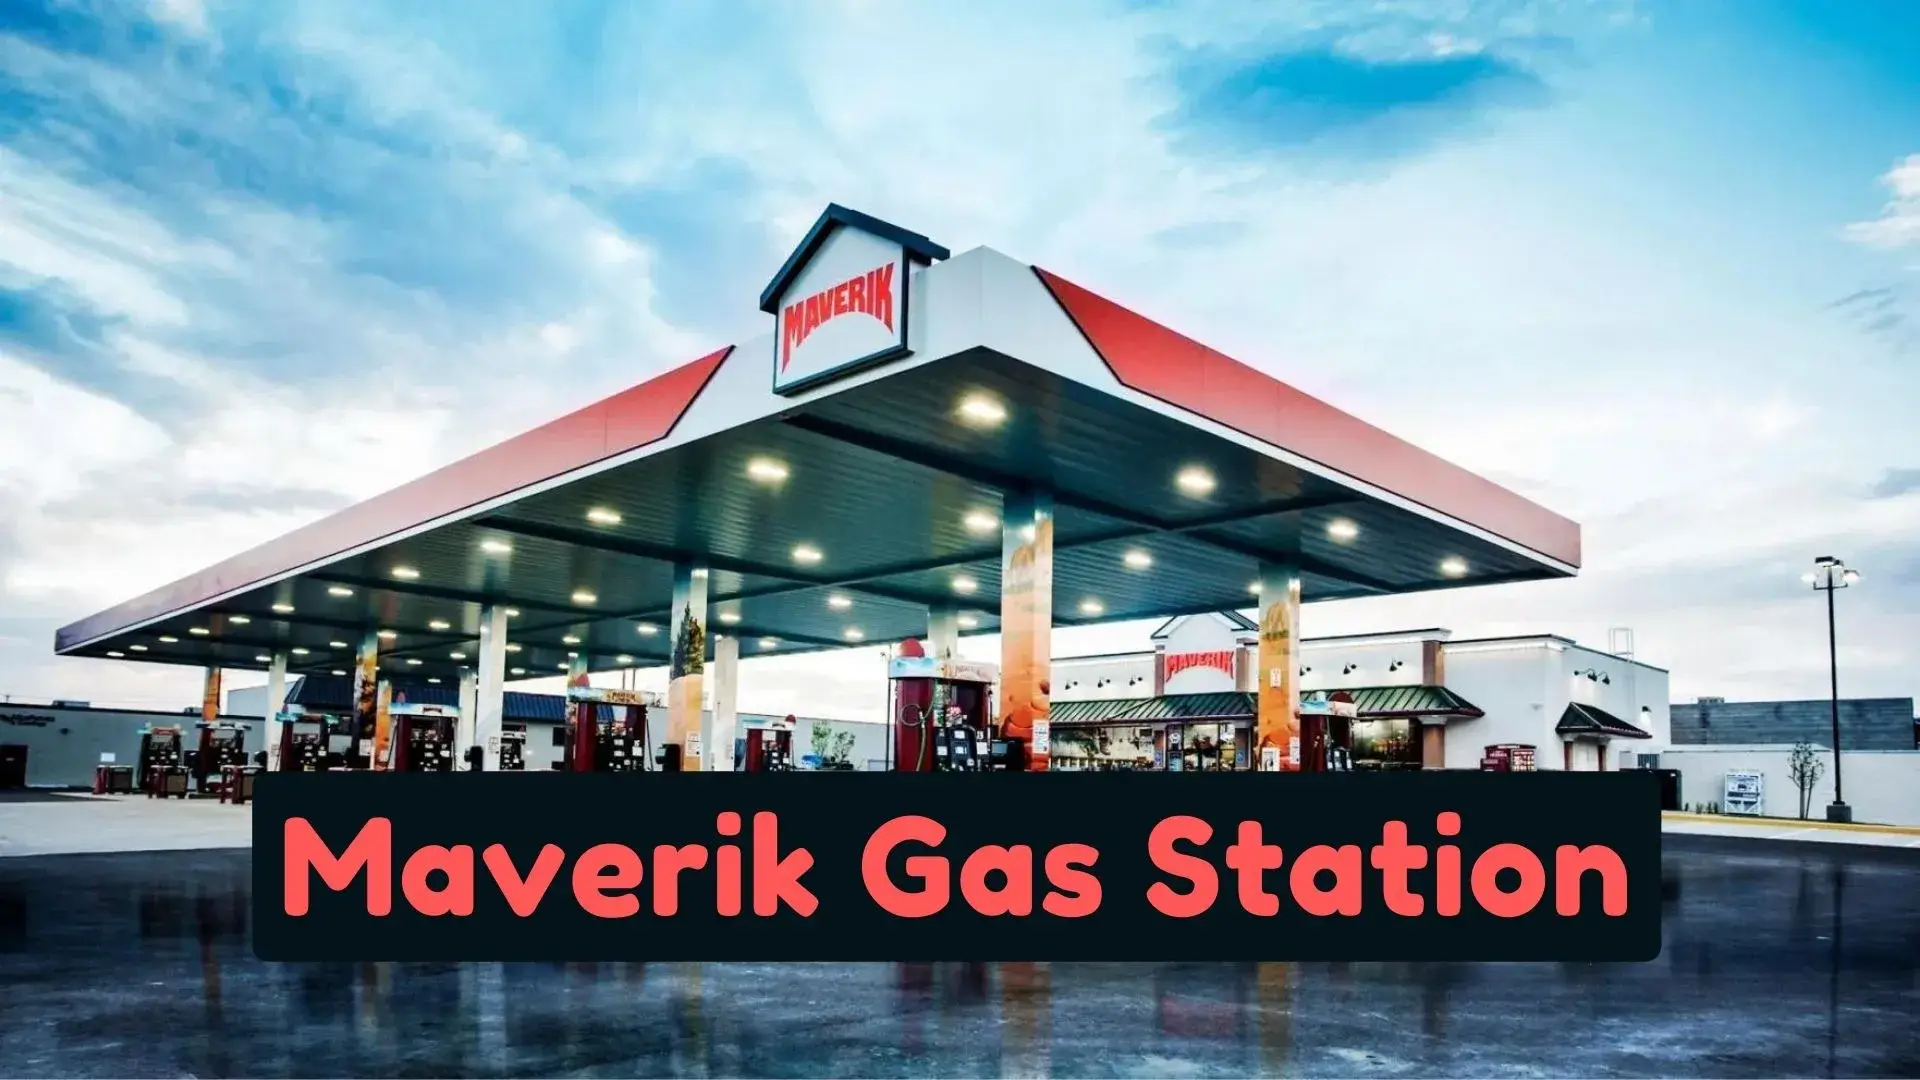 Discover the convenience of Maverik gas station near me locations. Quality fuel and snacks just moments away from you!